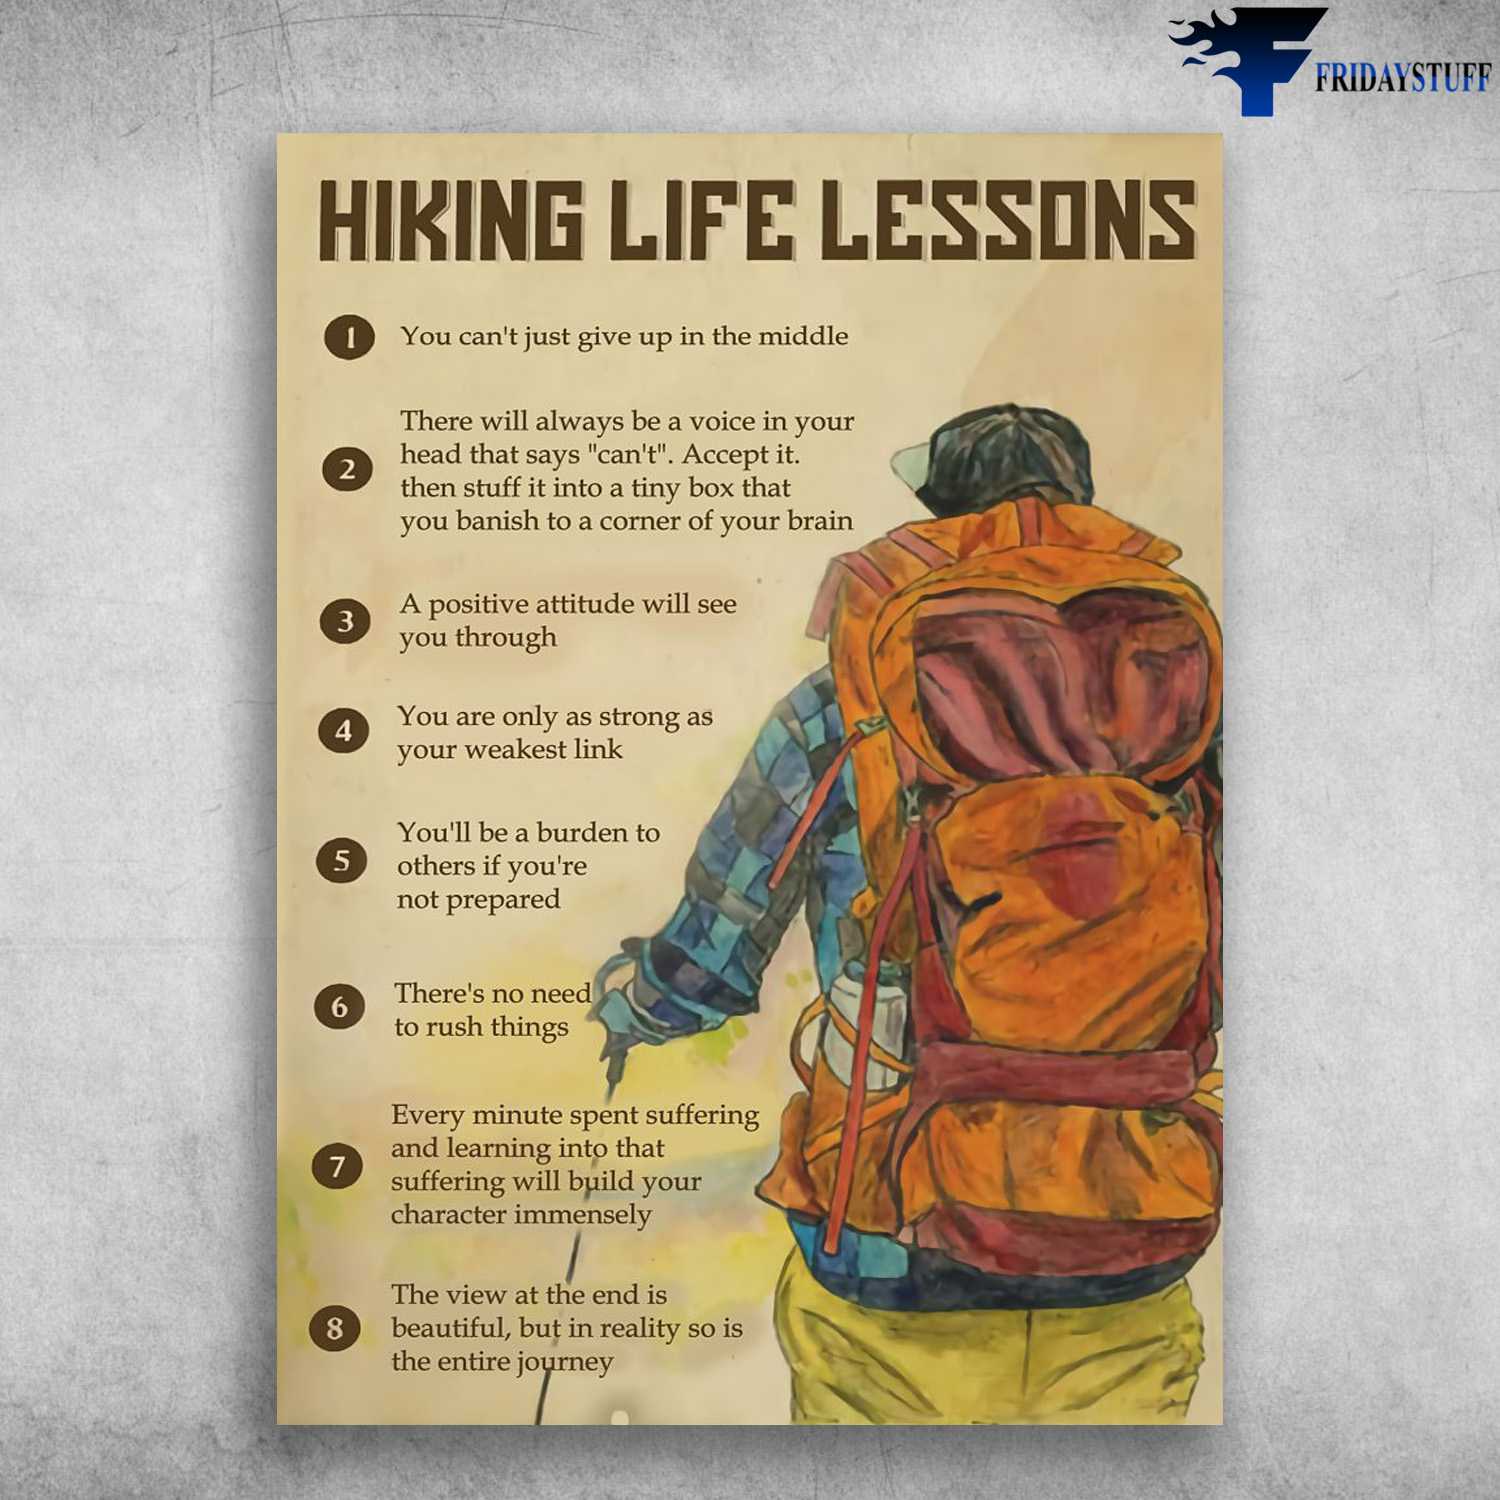 Hiking Poster, Hiking Life Lessons - You Can't Just Give Up In The Middle, There Will Always Be A Voice, In Your Head, That Says Can't, A Positive Attitude Will See You Through